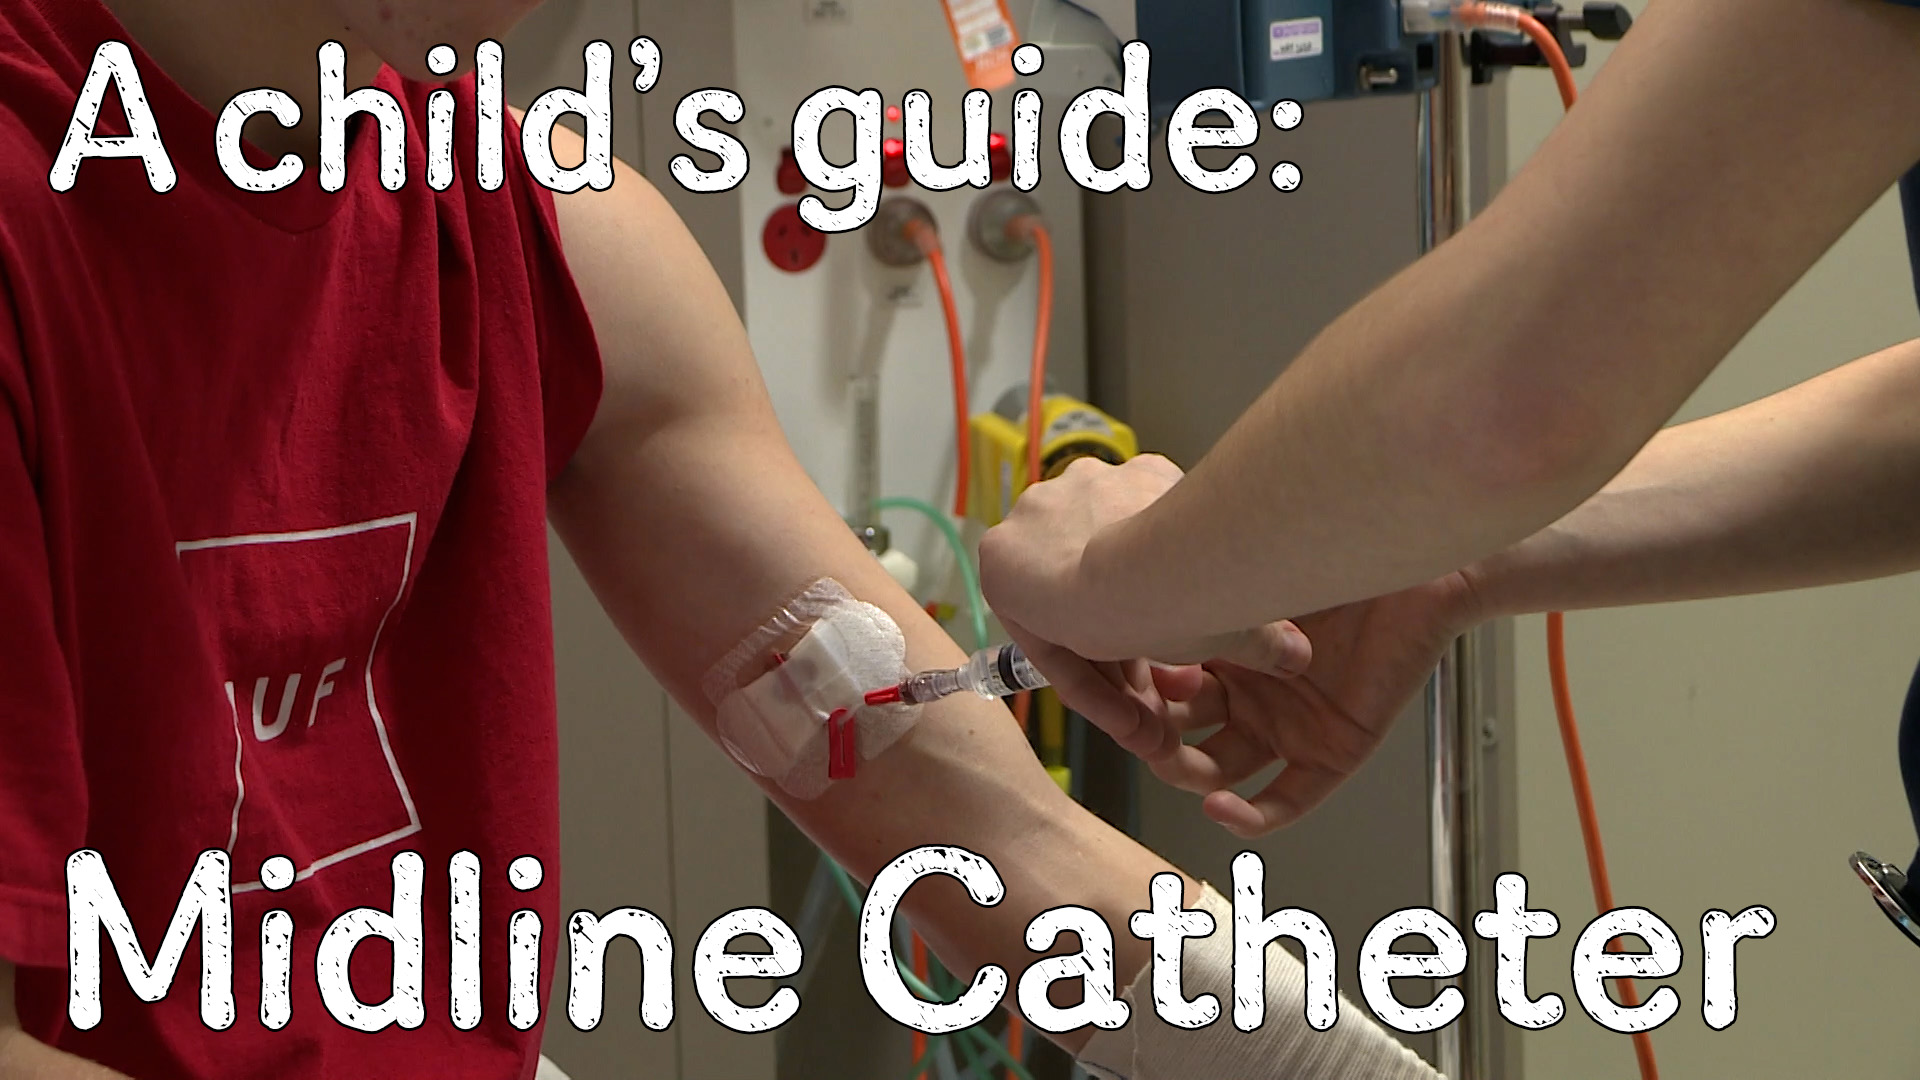 Harry tells us what happened when he came to The Royal Children's Hospital to have a midline catheter.